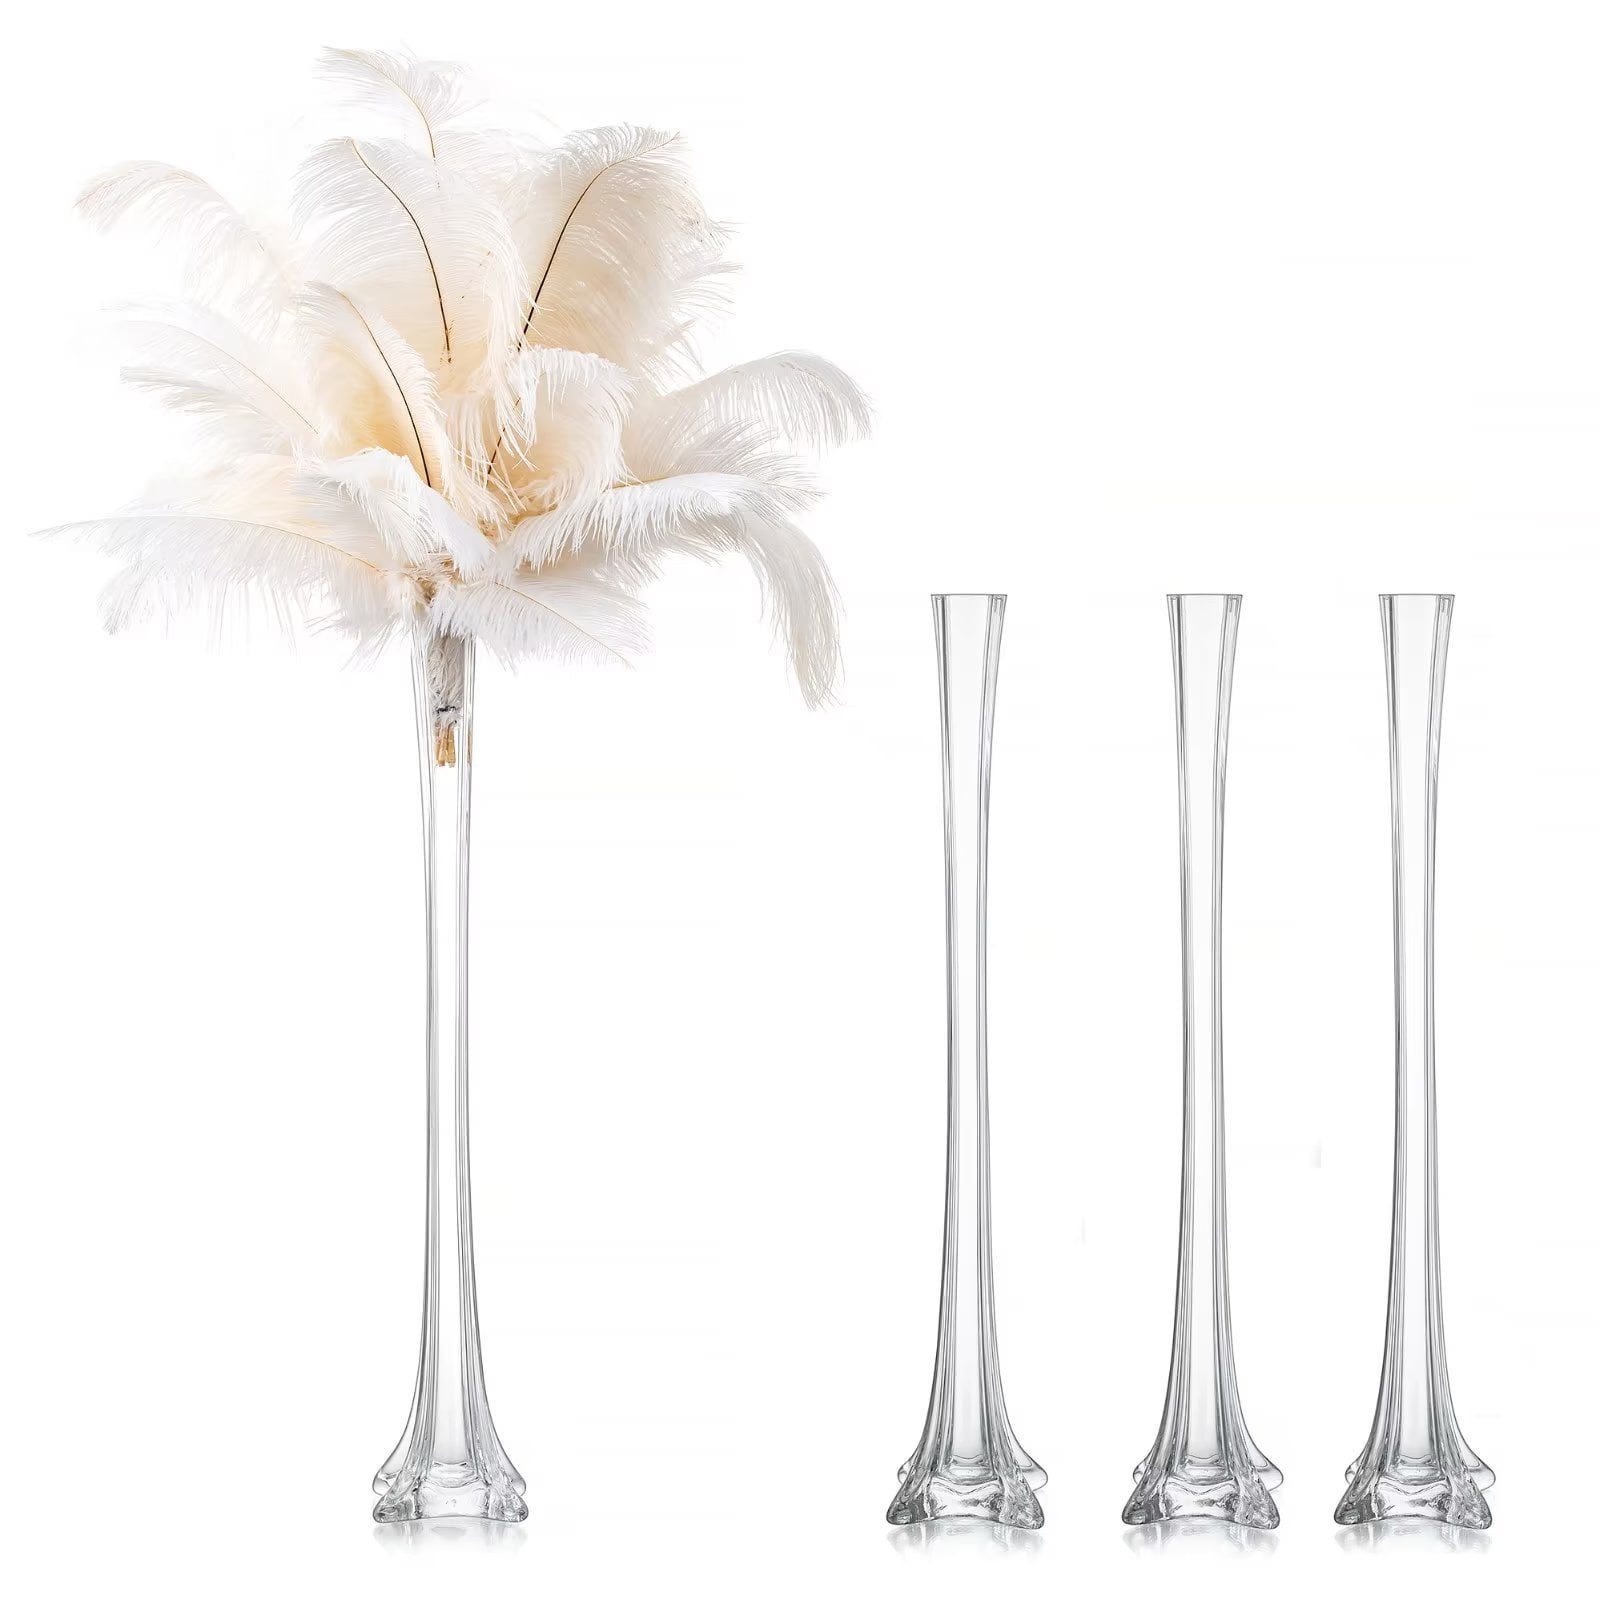  Inweder Tall Glass Vases for Centerpieces - 20 Eiffel Tower  Vase Bulk, Tall Skinny Vase, Clear Glass Floral Container, Slim Decorative  Flower Stand Holder for Wedding, Birthday, Event, Home, Set of